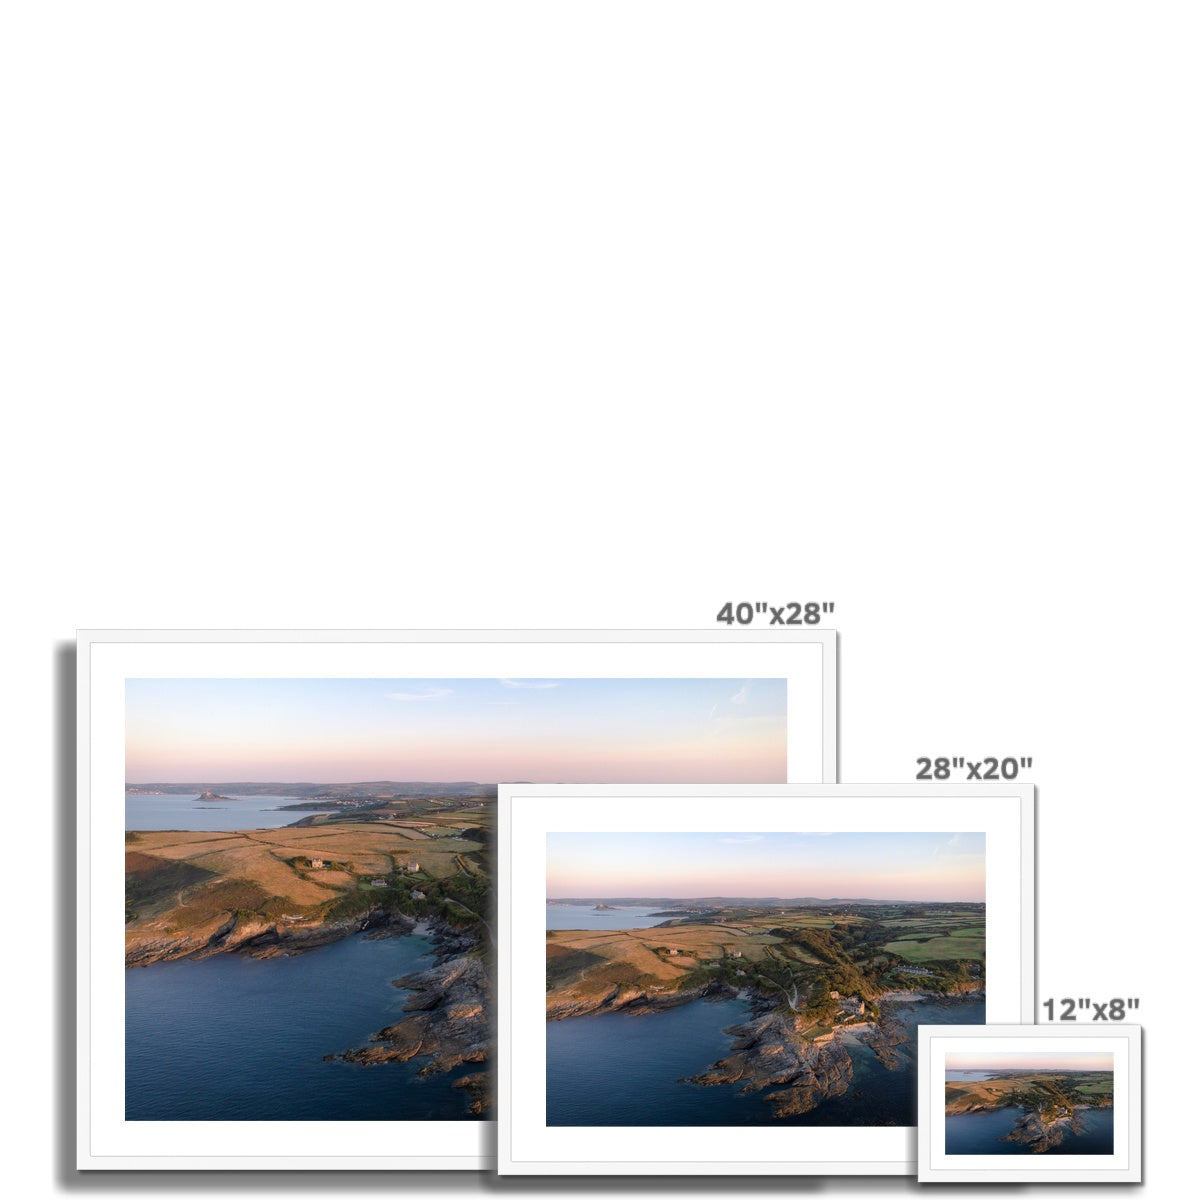 bessys prussia cove wooden frame sizes